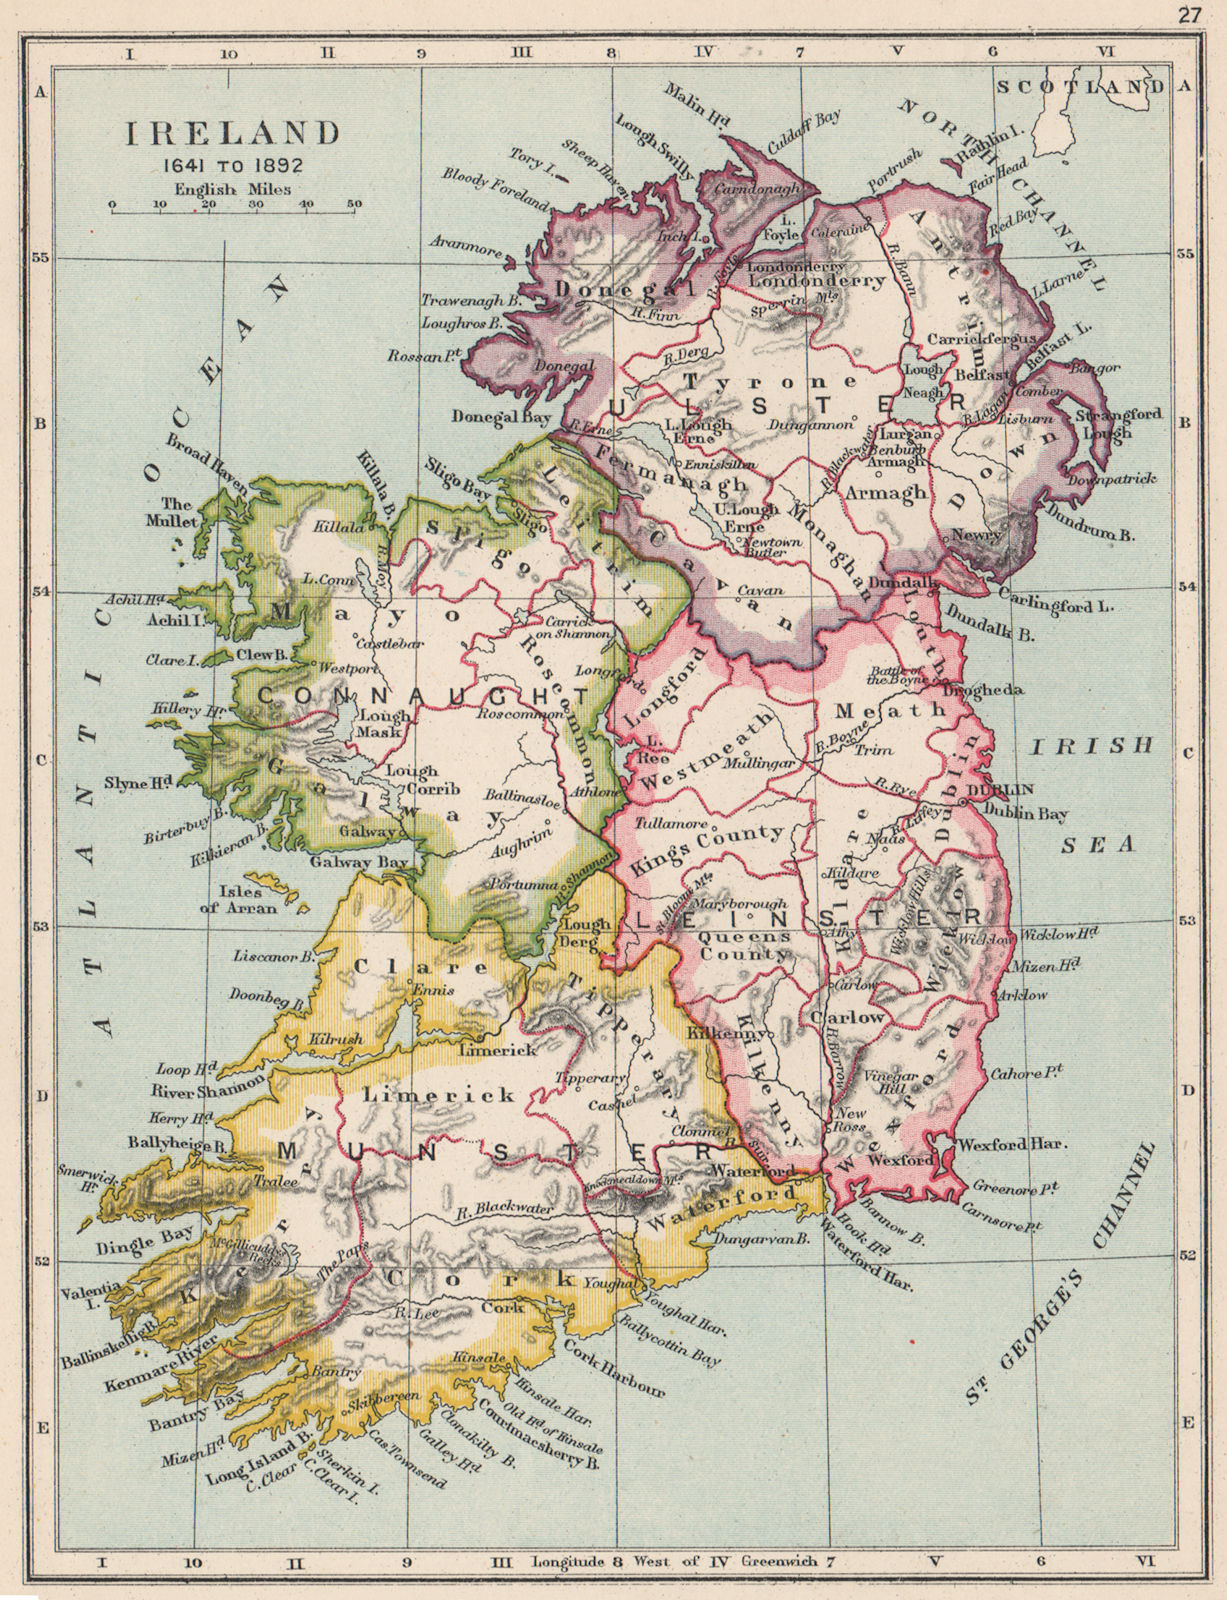 Associate Product IRELAND 1641 TO 1892. showing counties provinces 1907 old antique map chart